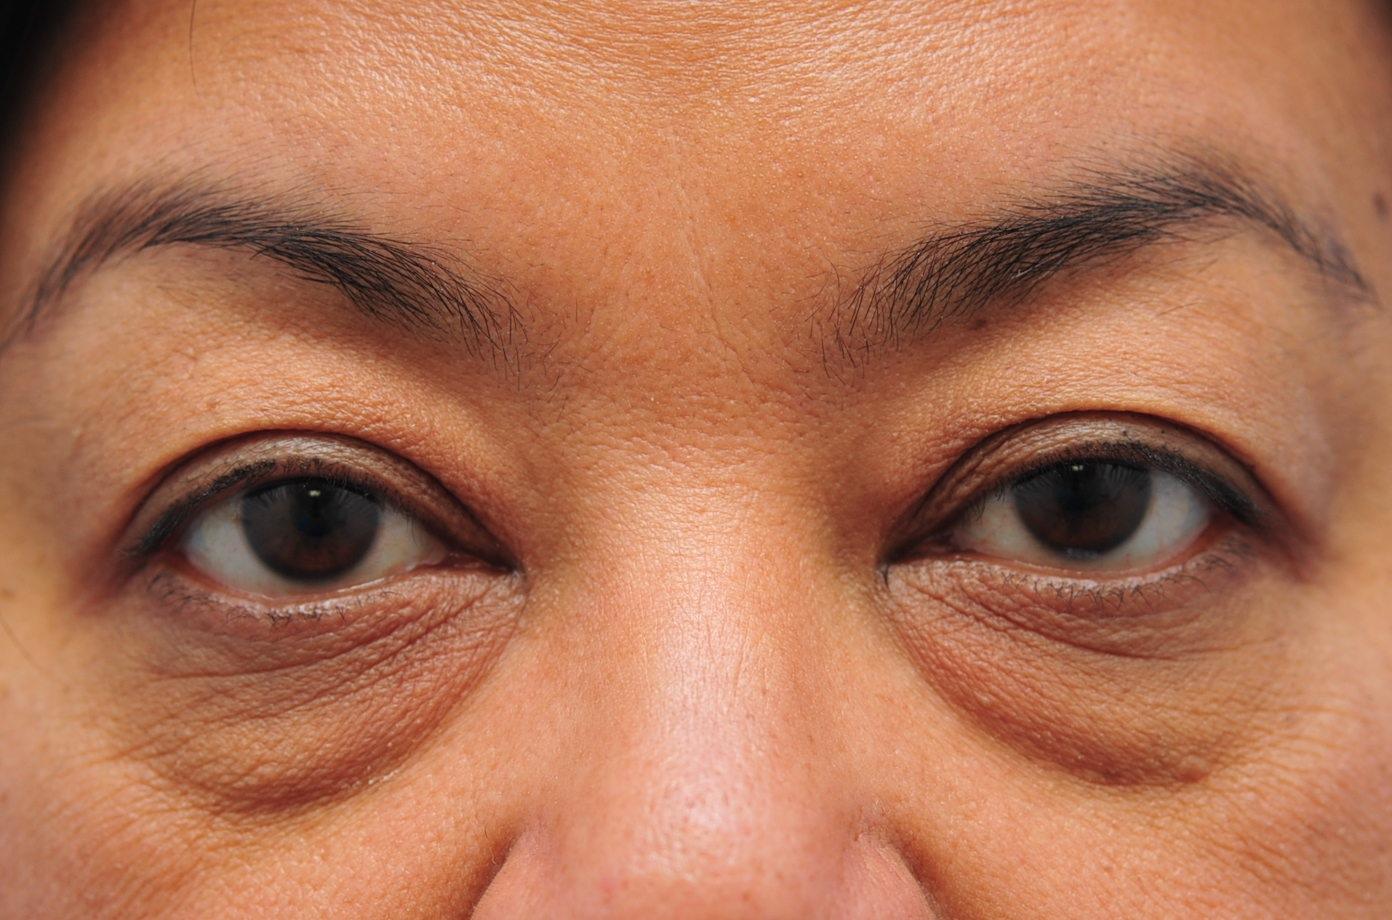 woman pre-laser eyelid surgery - before surgery picture